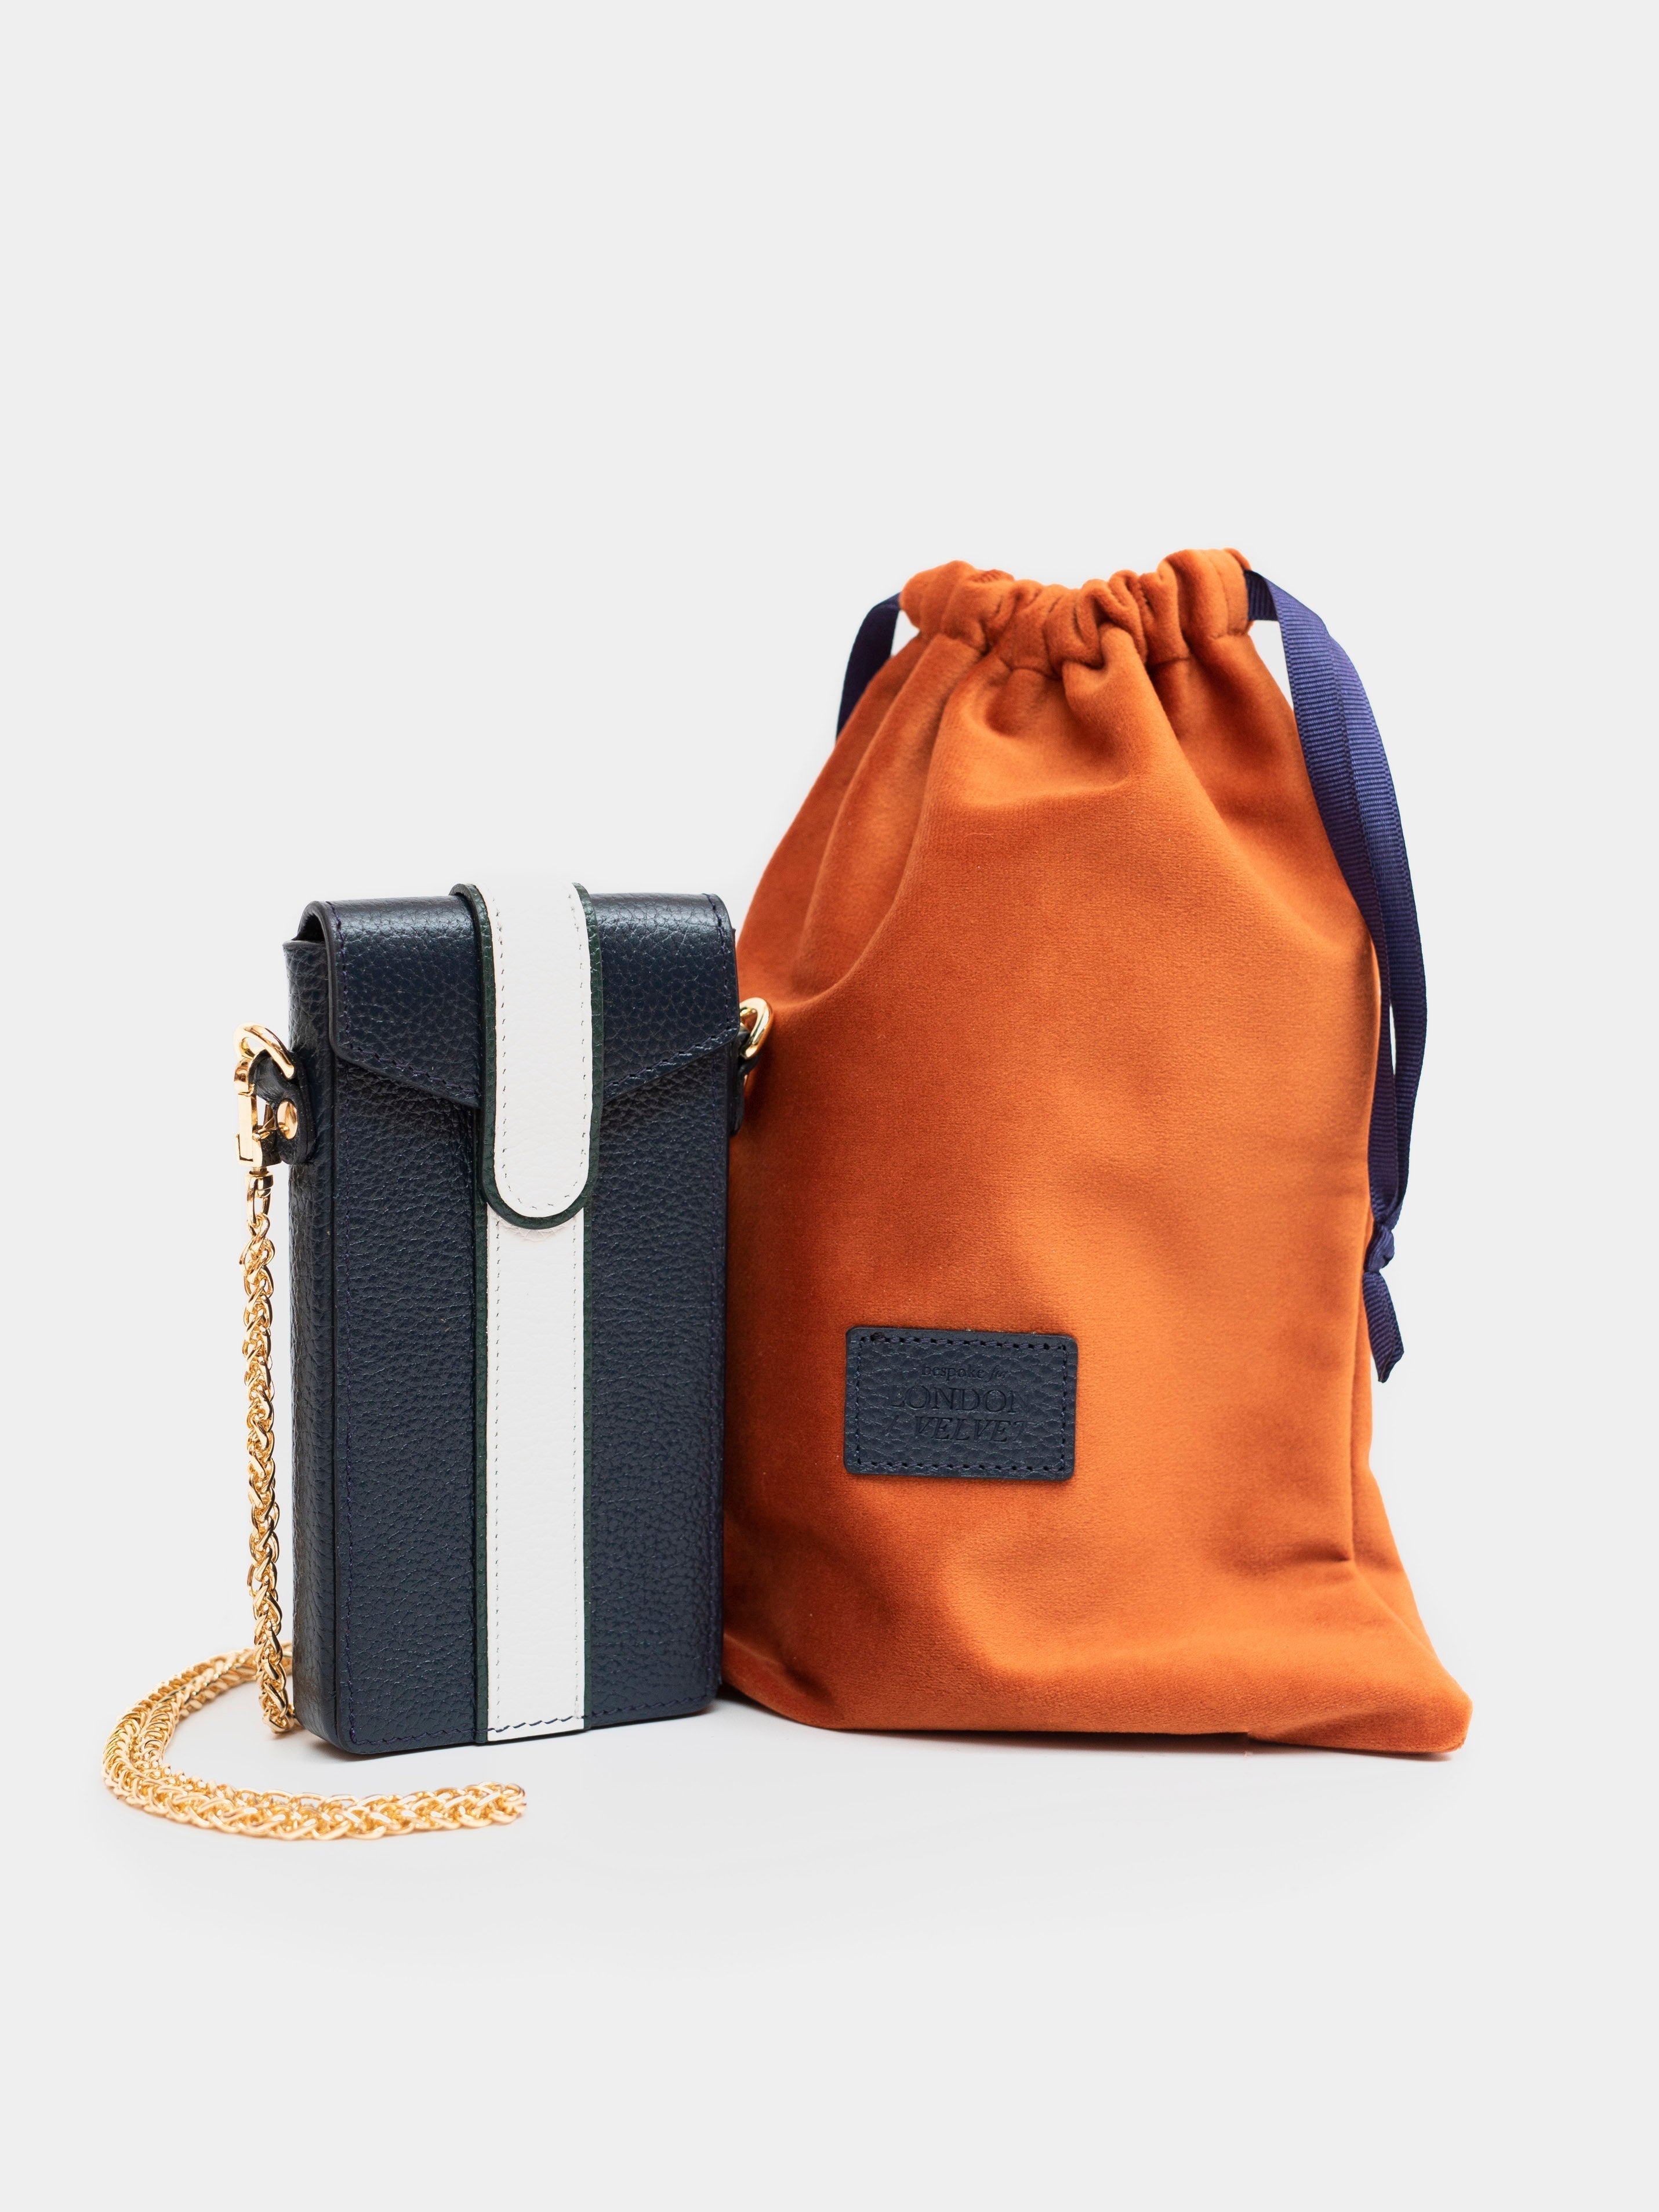 The Phone Pouch, Baby Blue & Orange